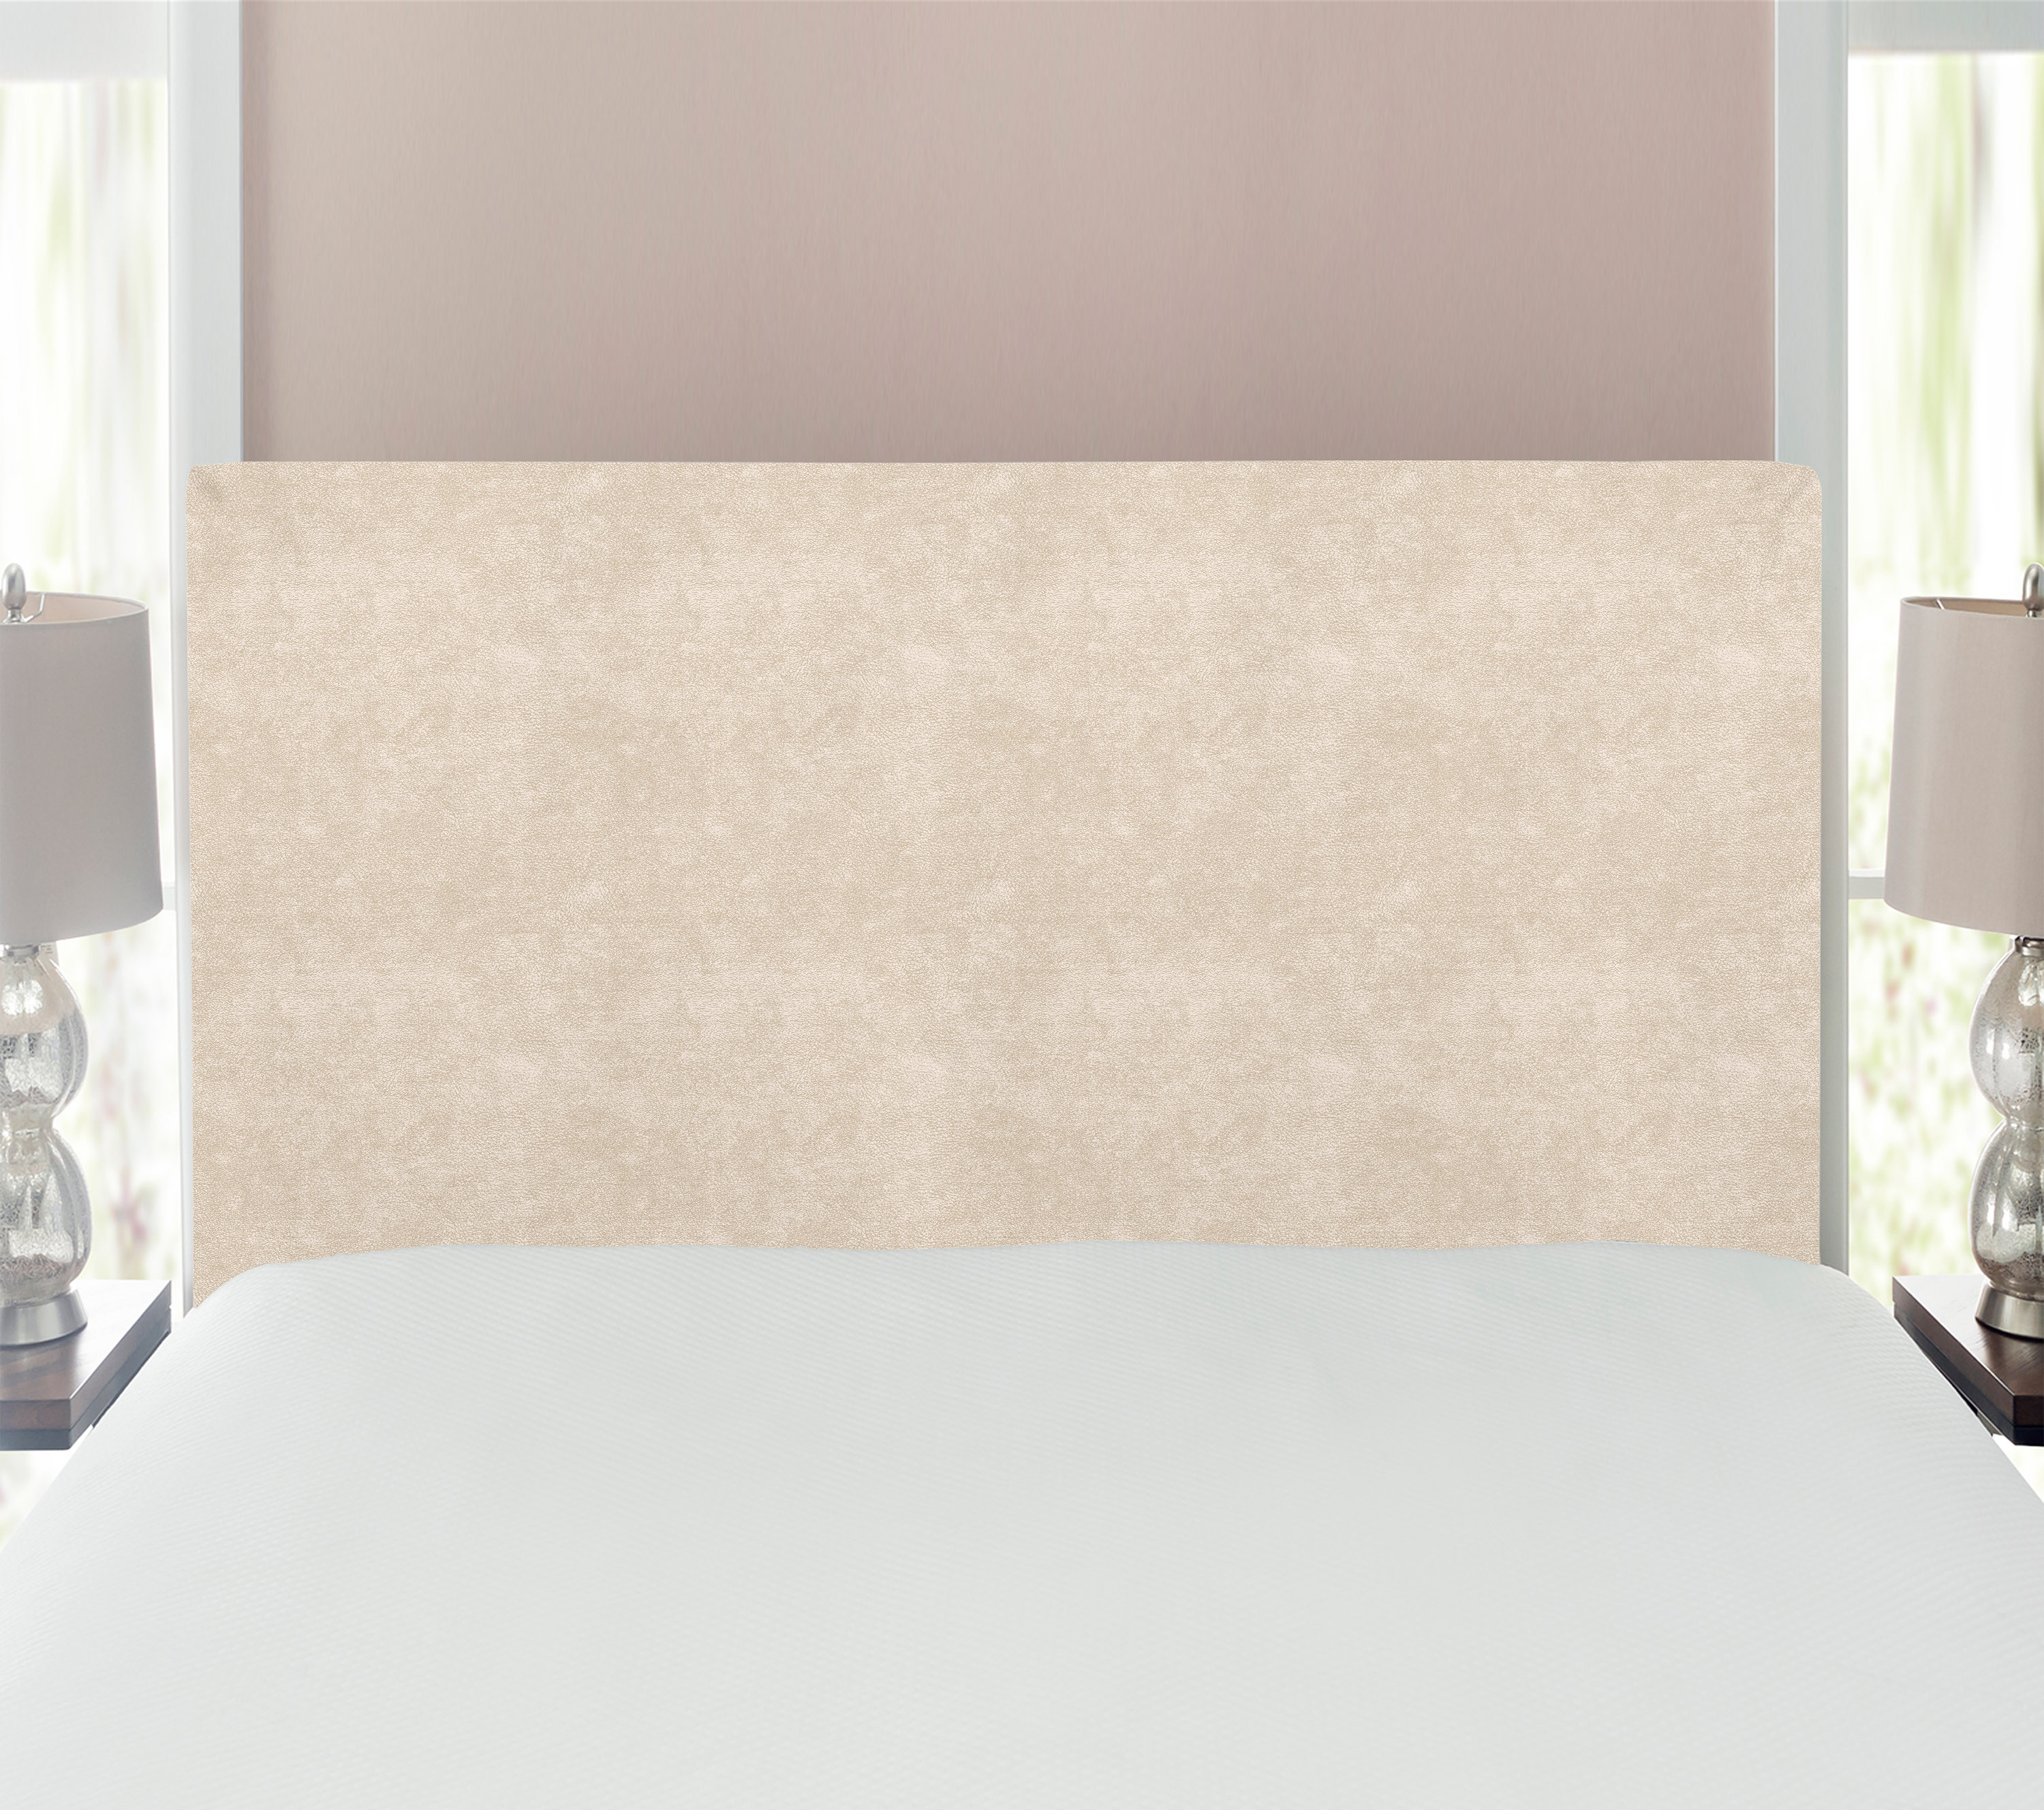 Faux Suede Headboard, Digitally Printed Grunge Texture, Upholstered Decorative Metal Bed Headboard with Memory Foam for Dorm and Bedroom Accent Furniture, Ivory, Twin, by Ambesonne - image 1 of 3